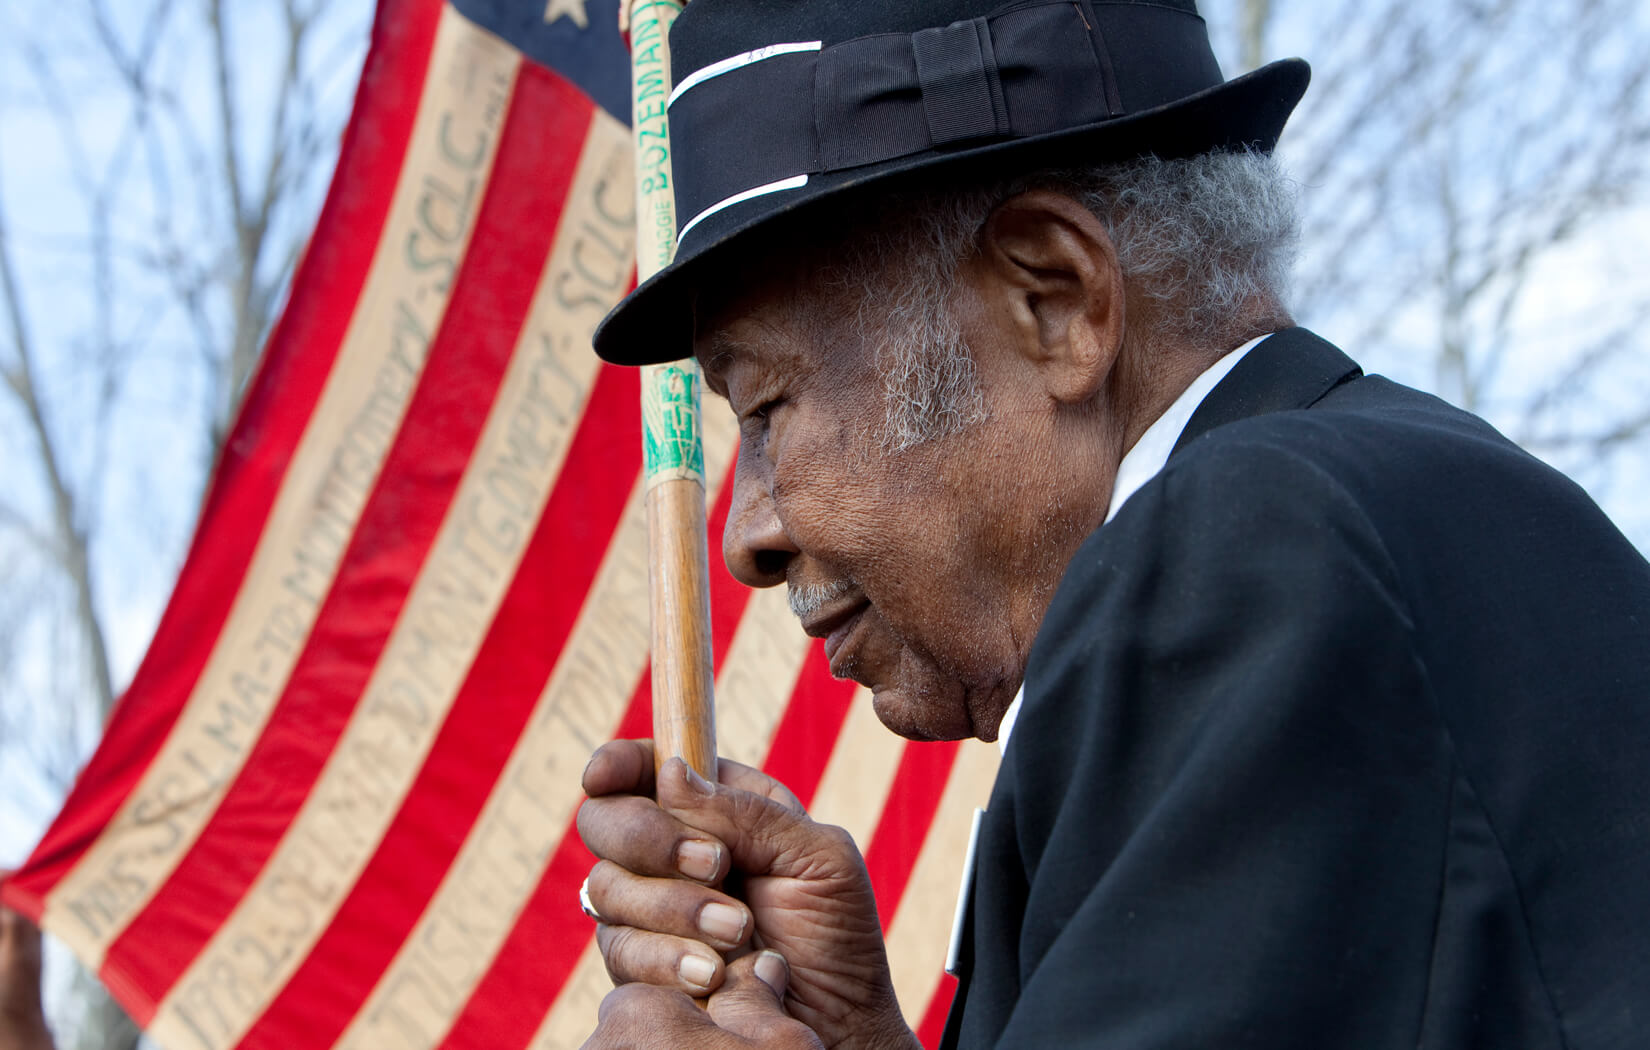 A close-up photo of a man in a black fedora holding an American flag. He has short grey hair.